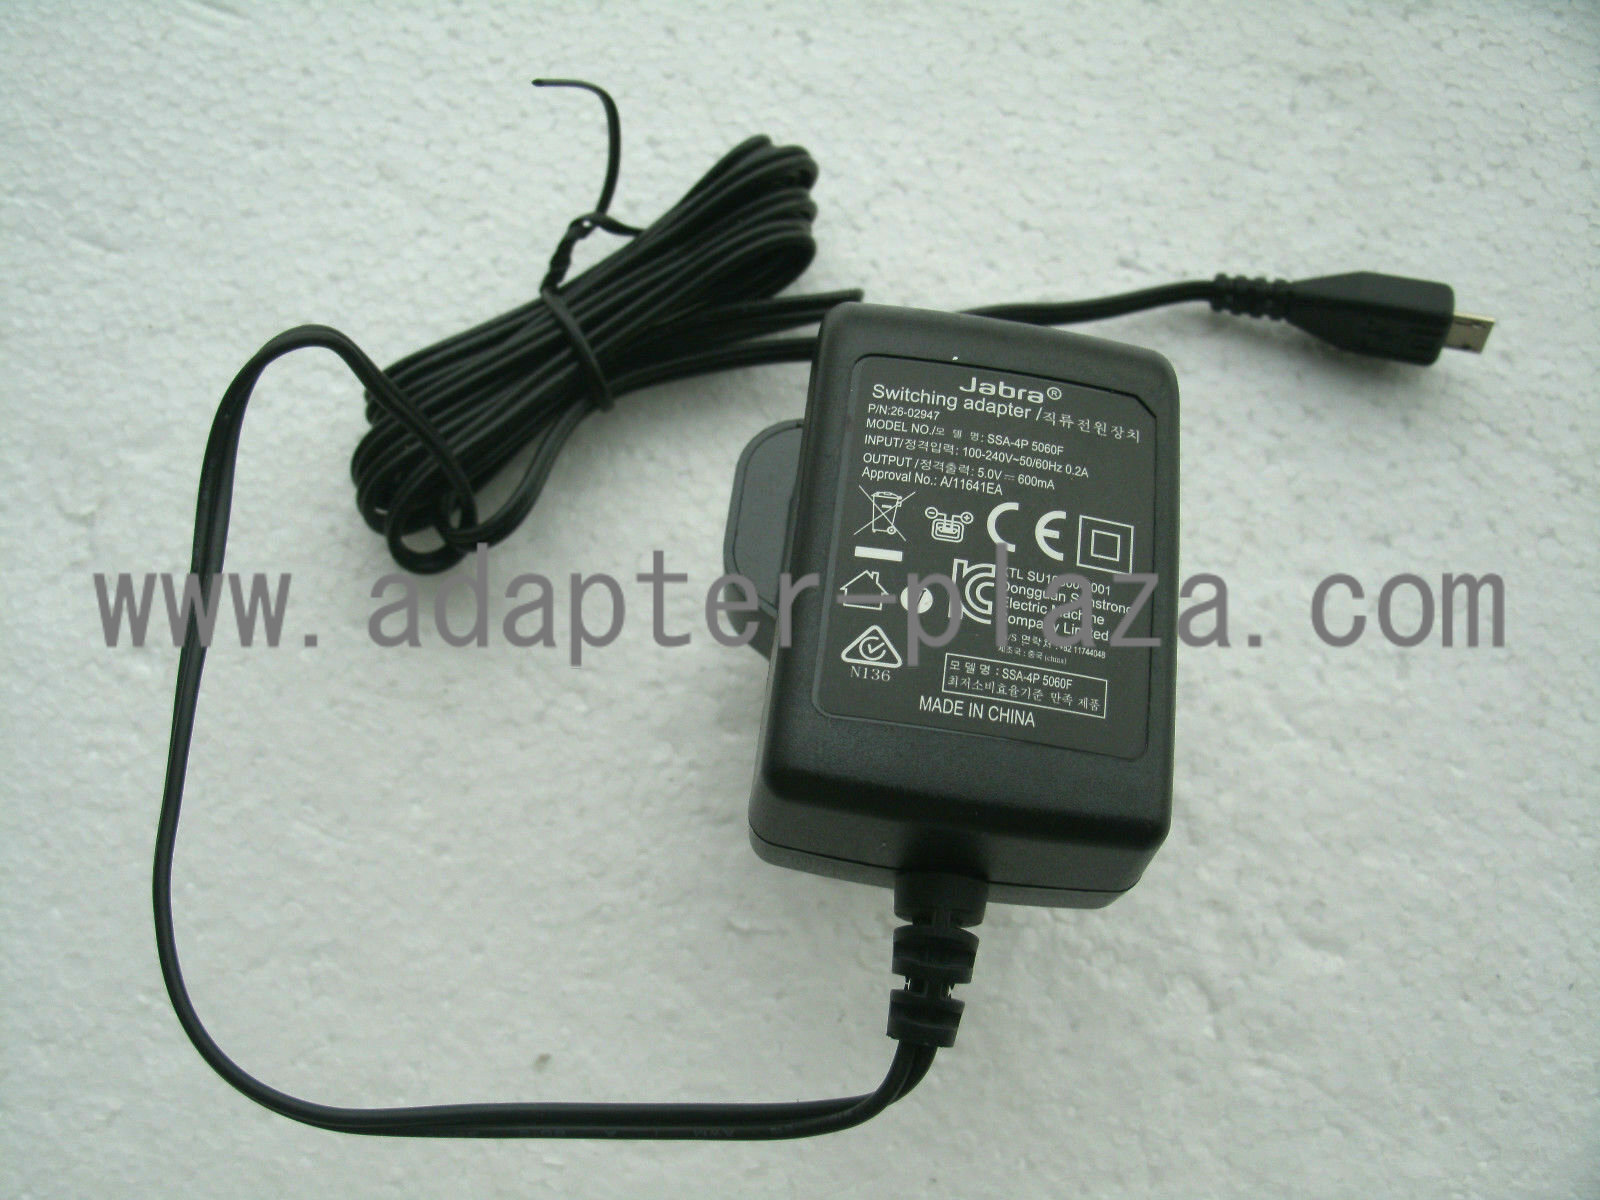 New JABRA SSA-4P 5060F SWITCHING ADAPTER 5V 0.6A 26-02947 power supply charger